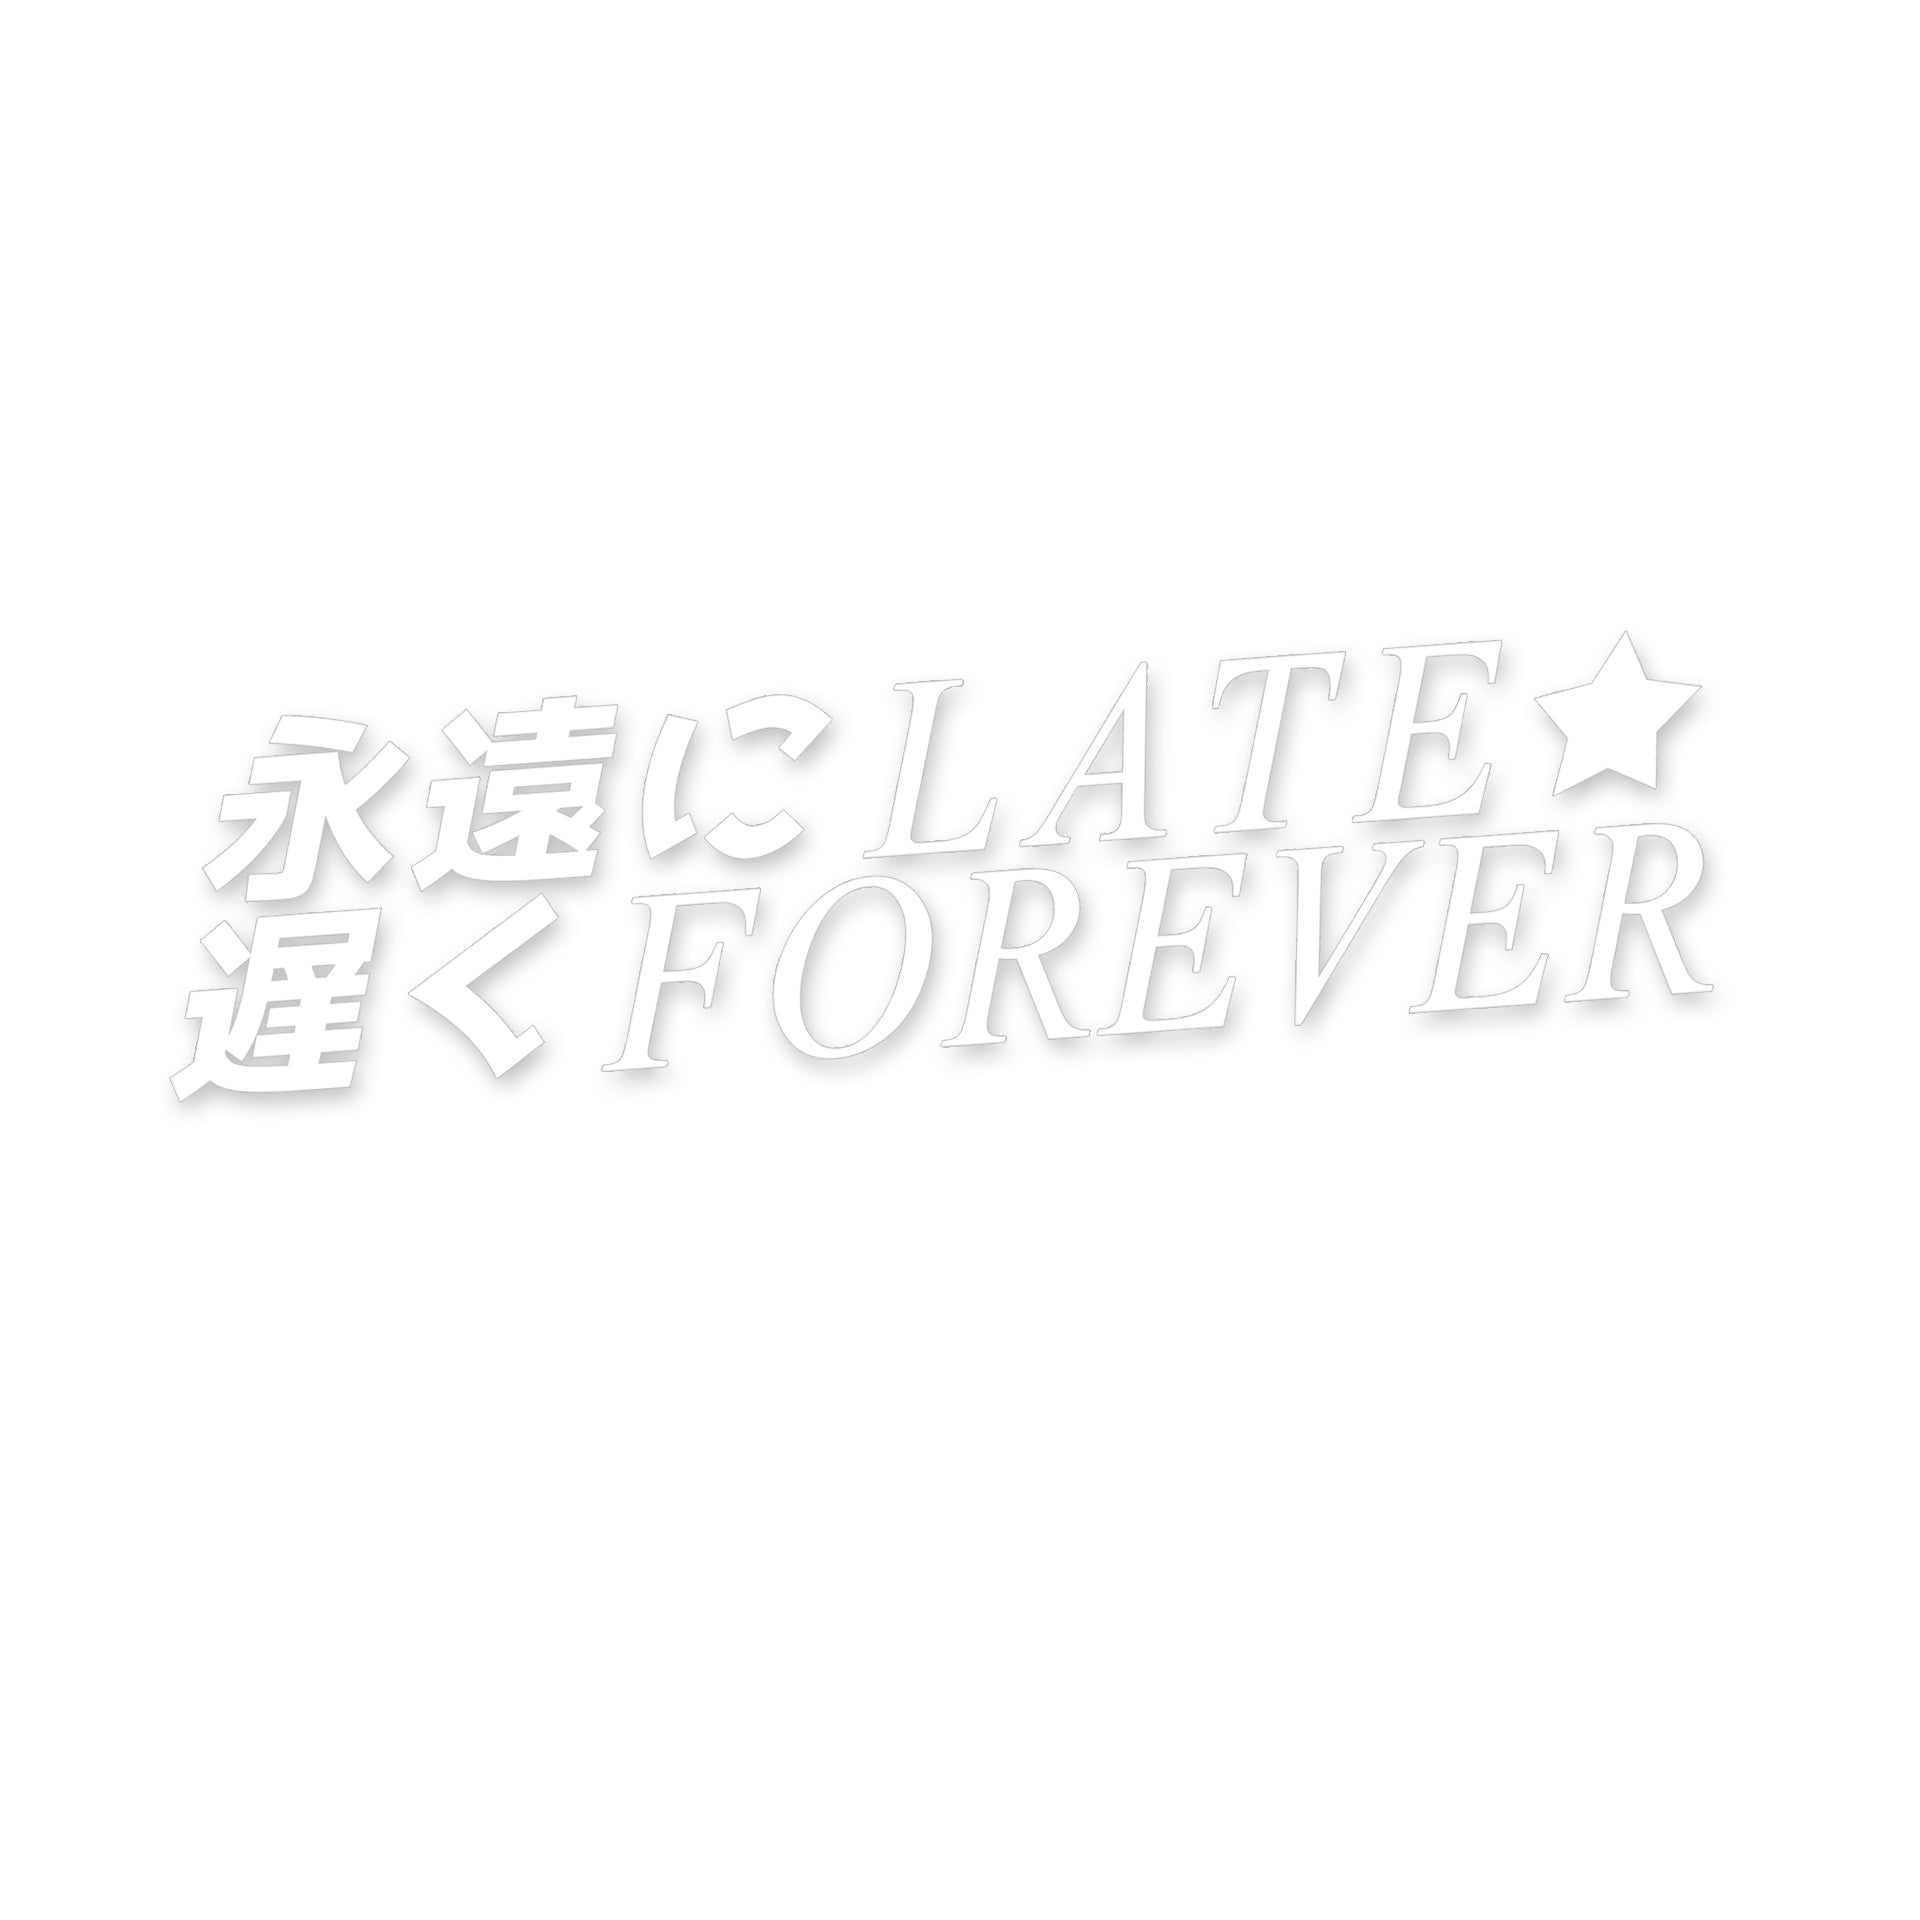 LATE FOREVER DECAL